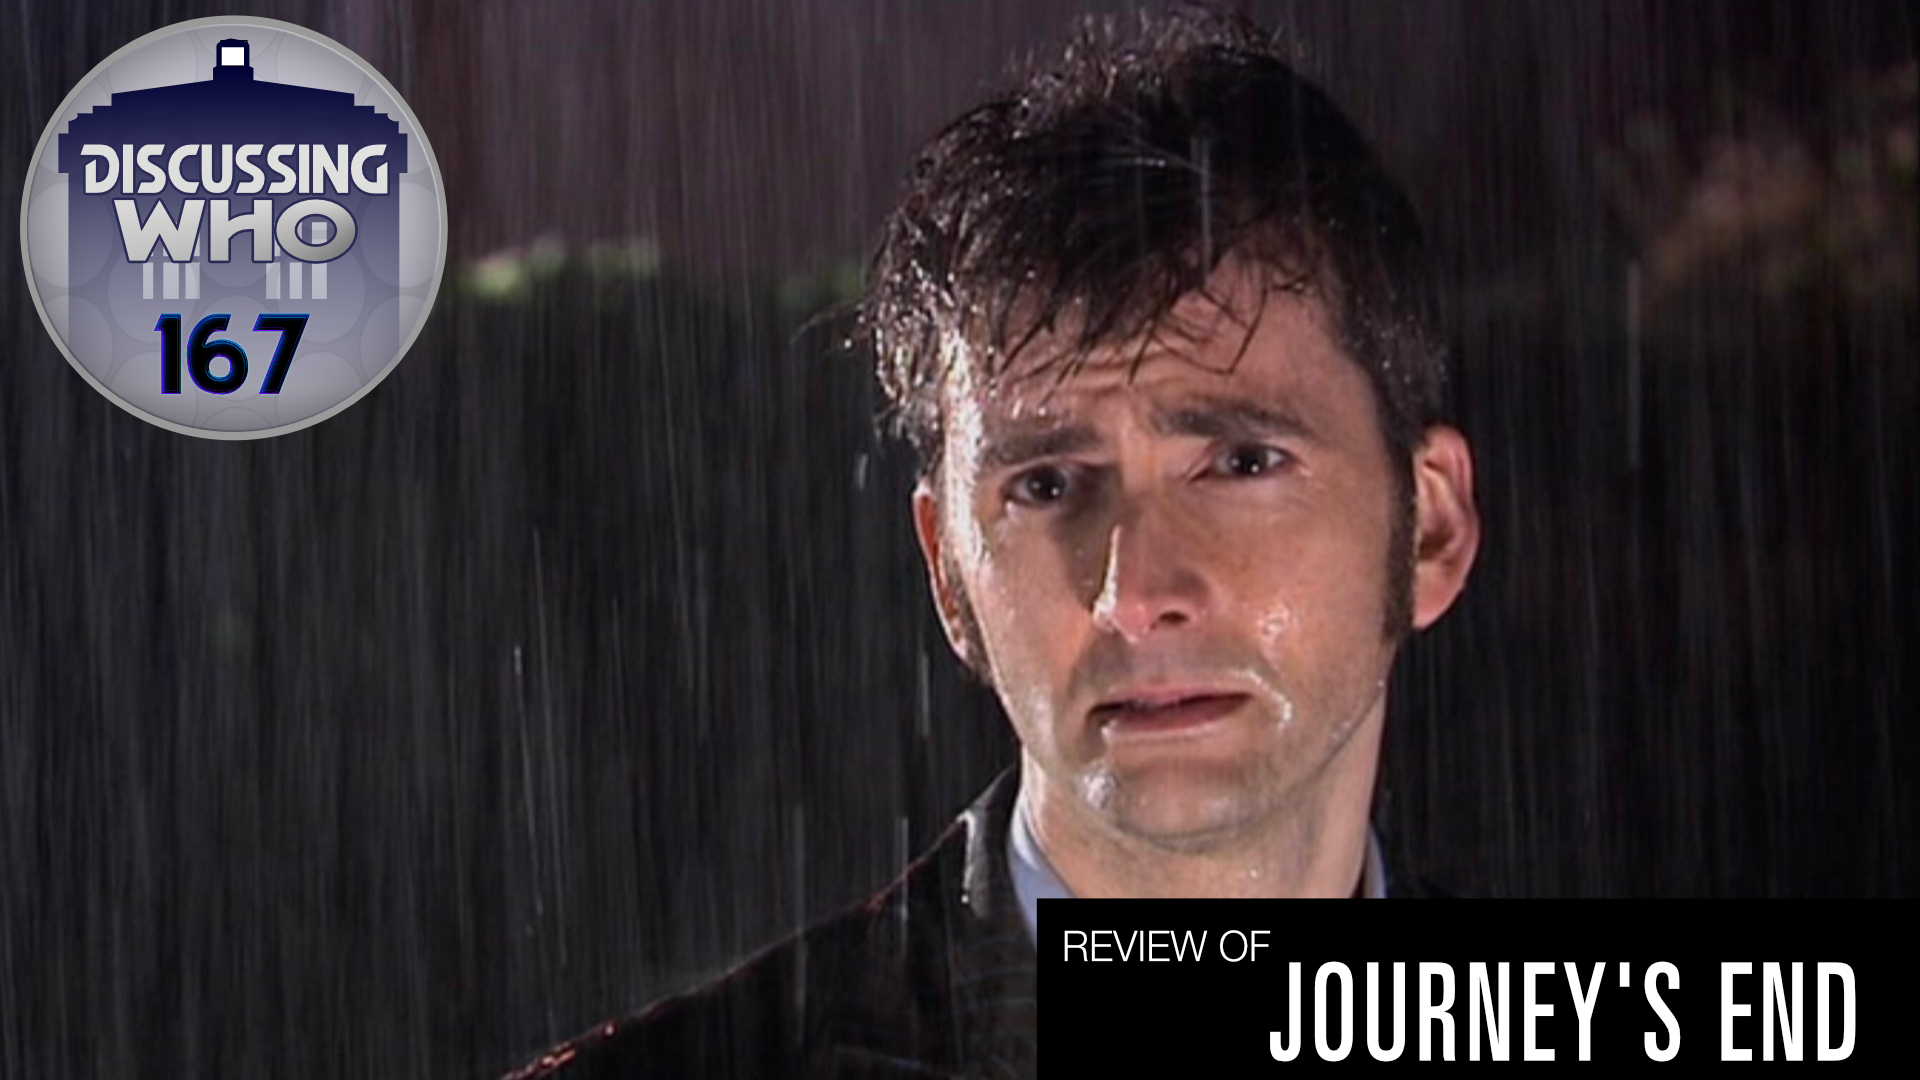 Discussing Who Podcast review of Doctor Who Journey's End